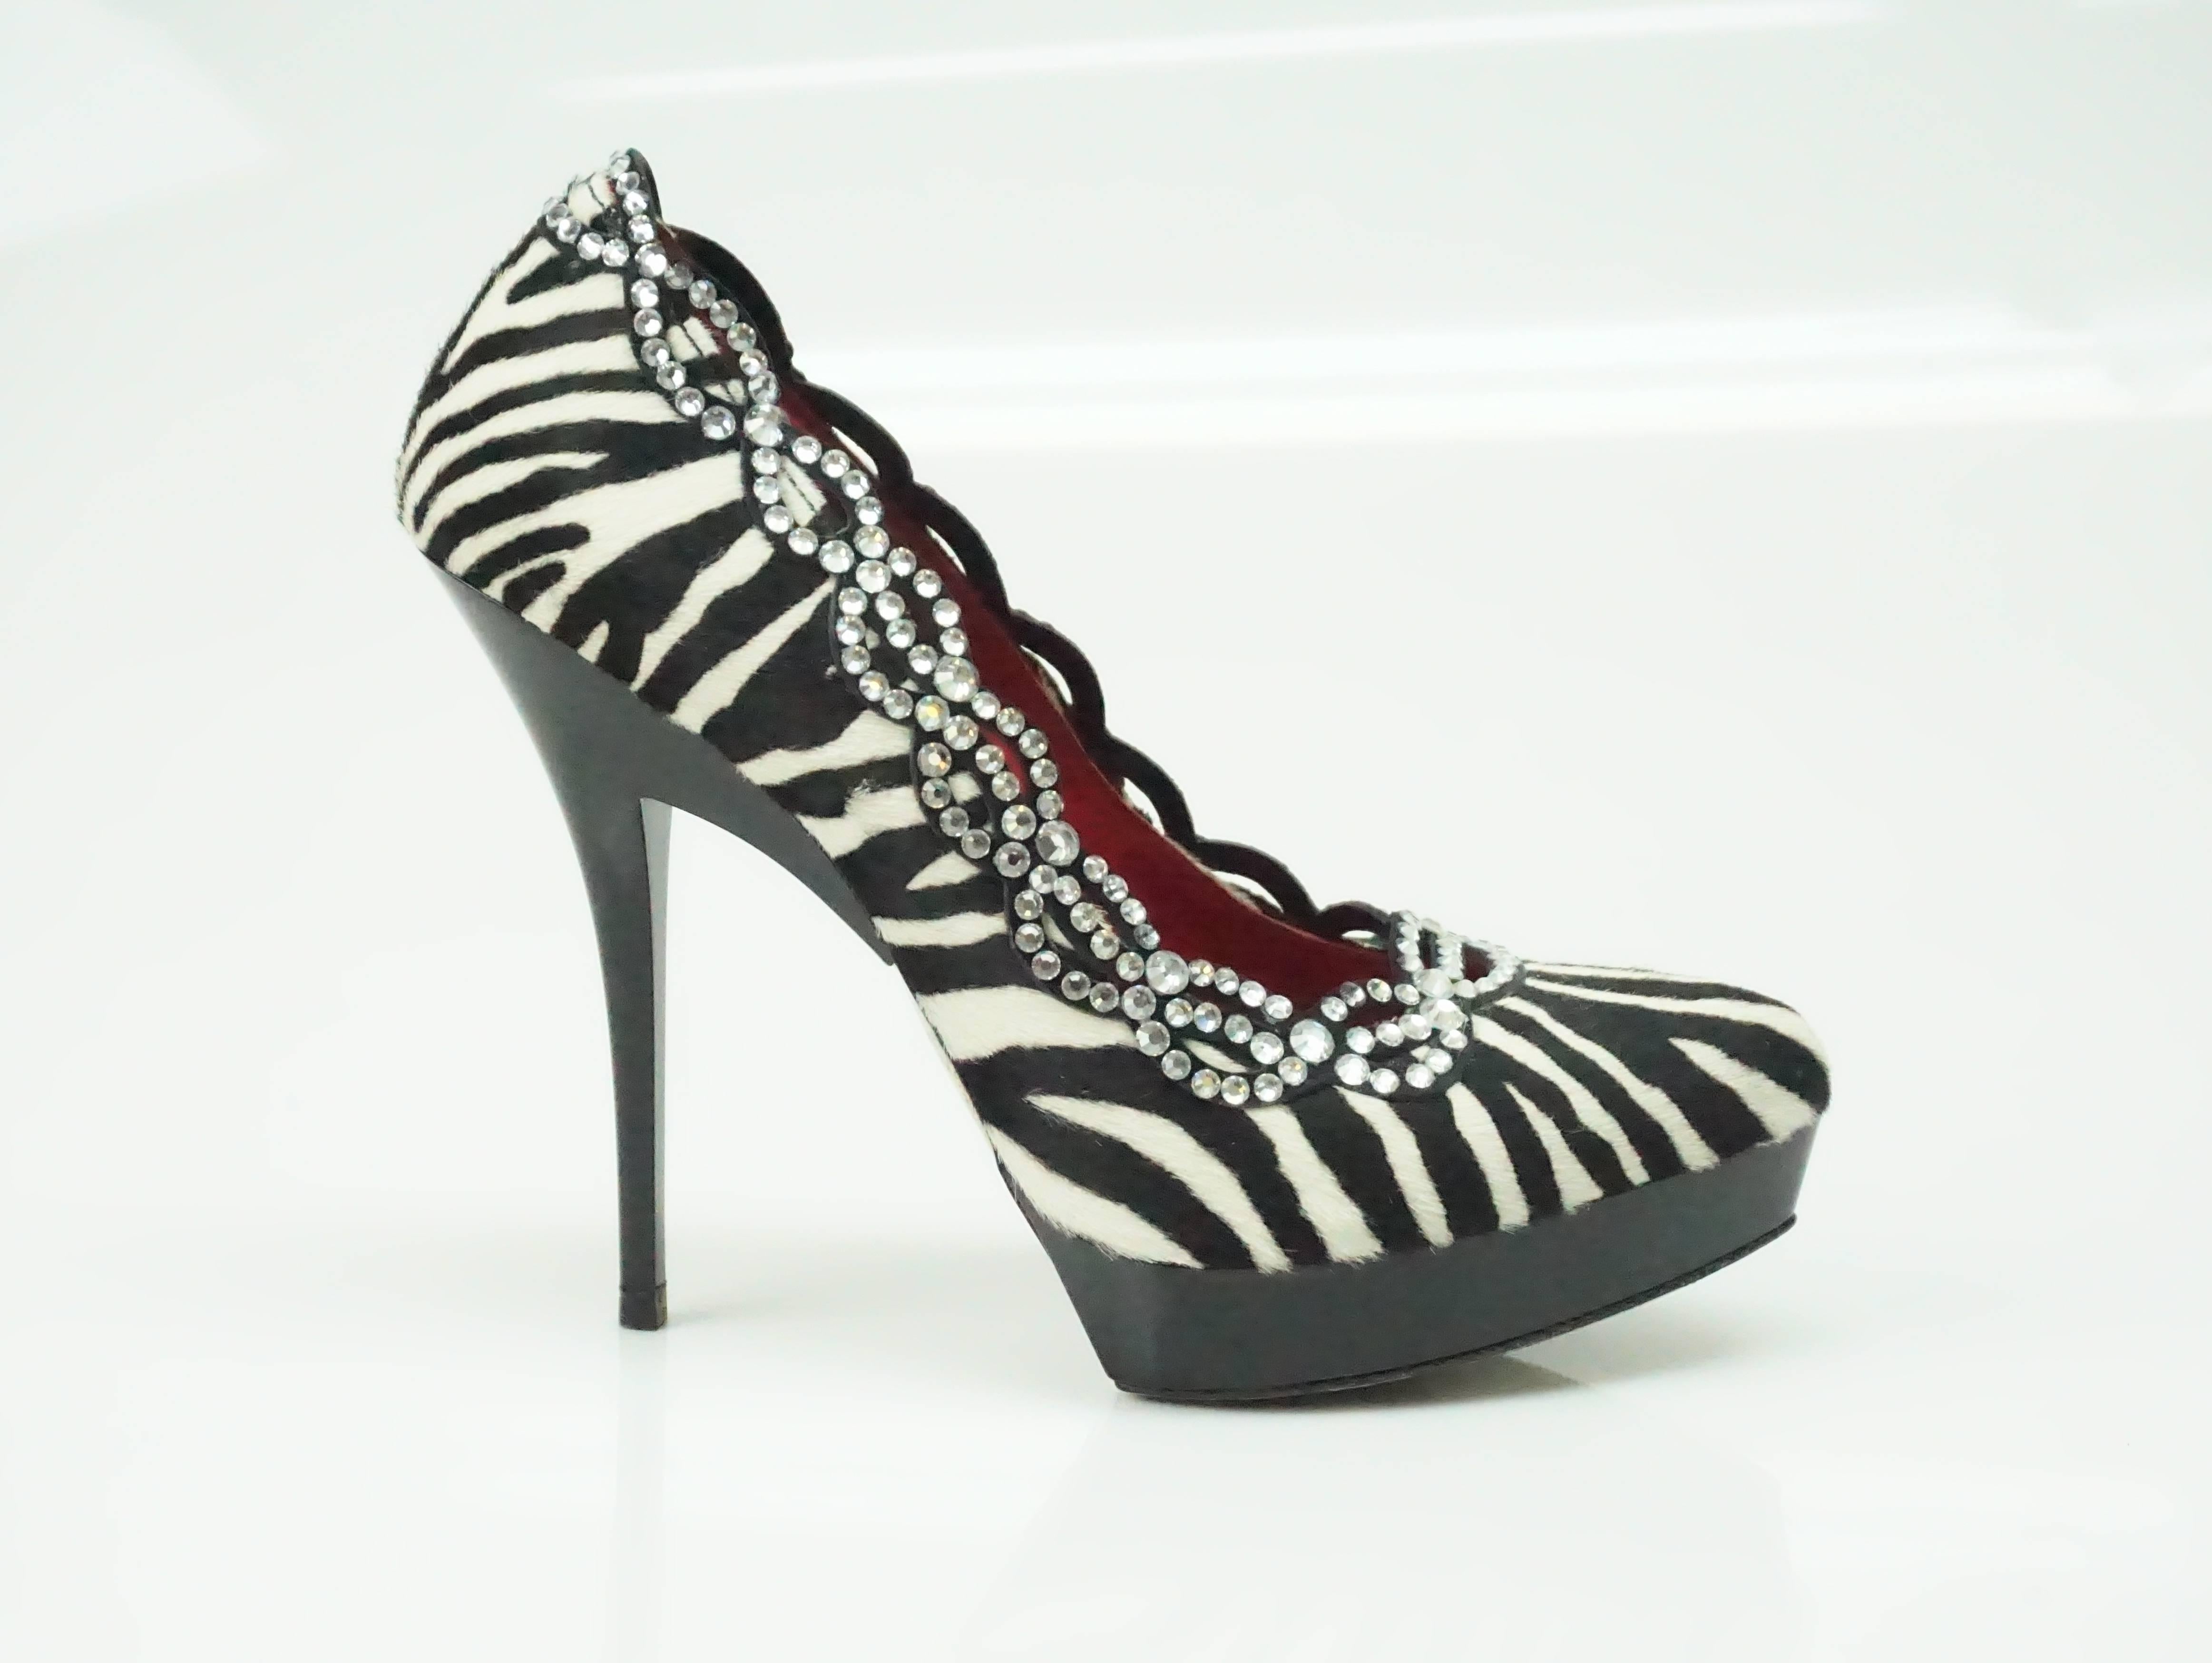 Cesare Paciotti Zebra Pony Hair Platform Pumps w/ Swarovski Detailing - 37  These vibrant heels are in excellent condition. There are barely any scuffs or marks and were hardly ever used. The heel is 5